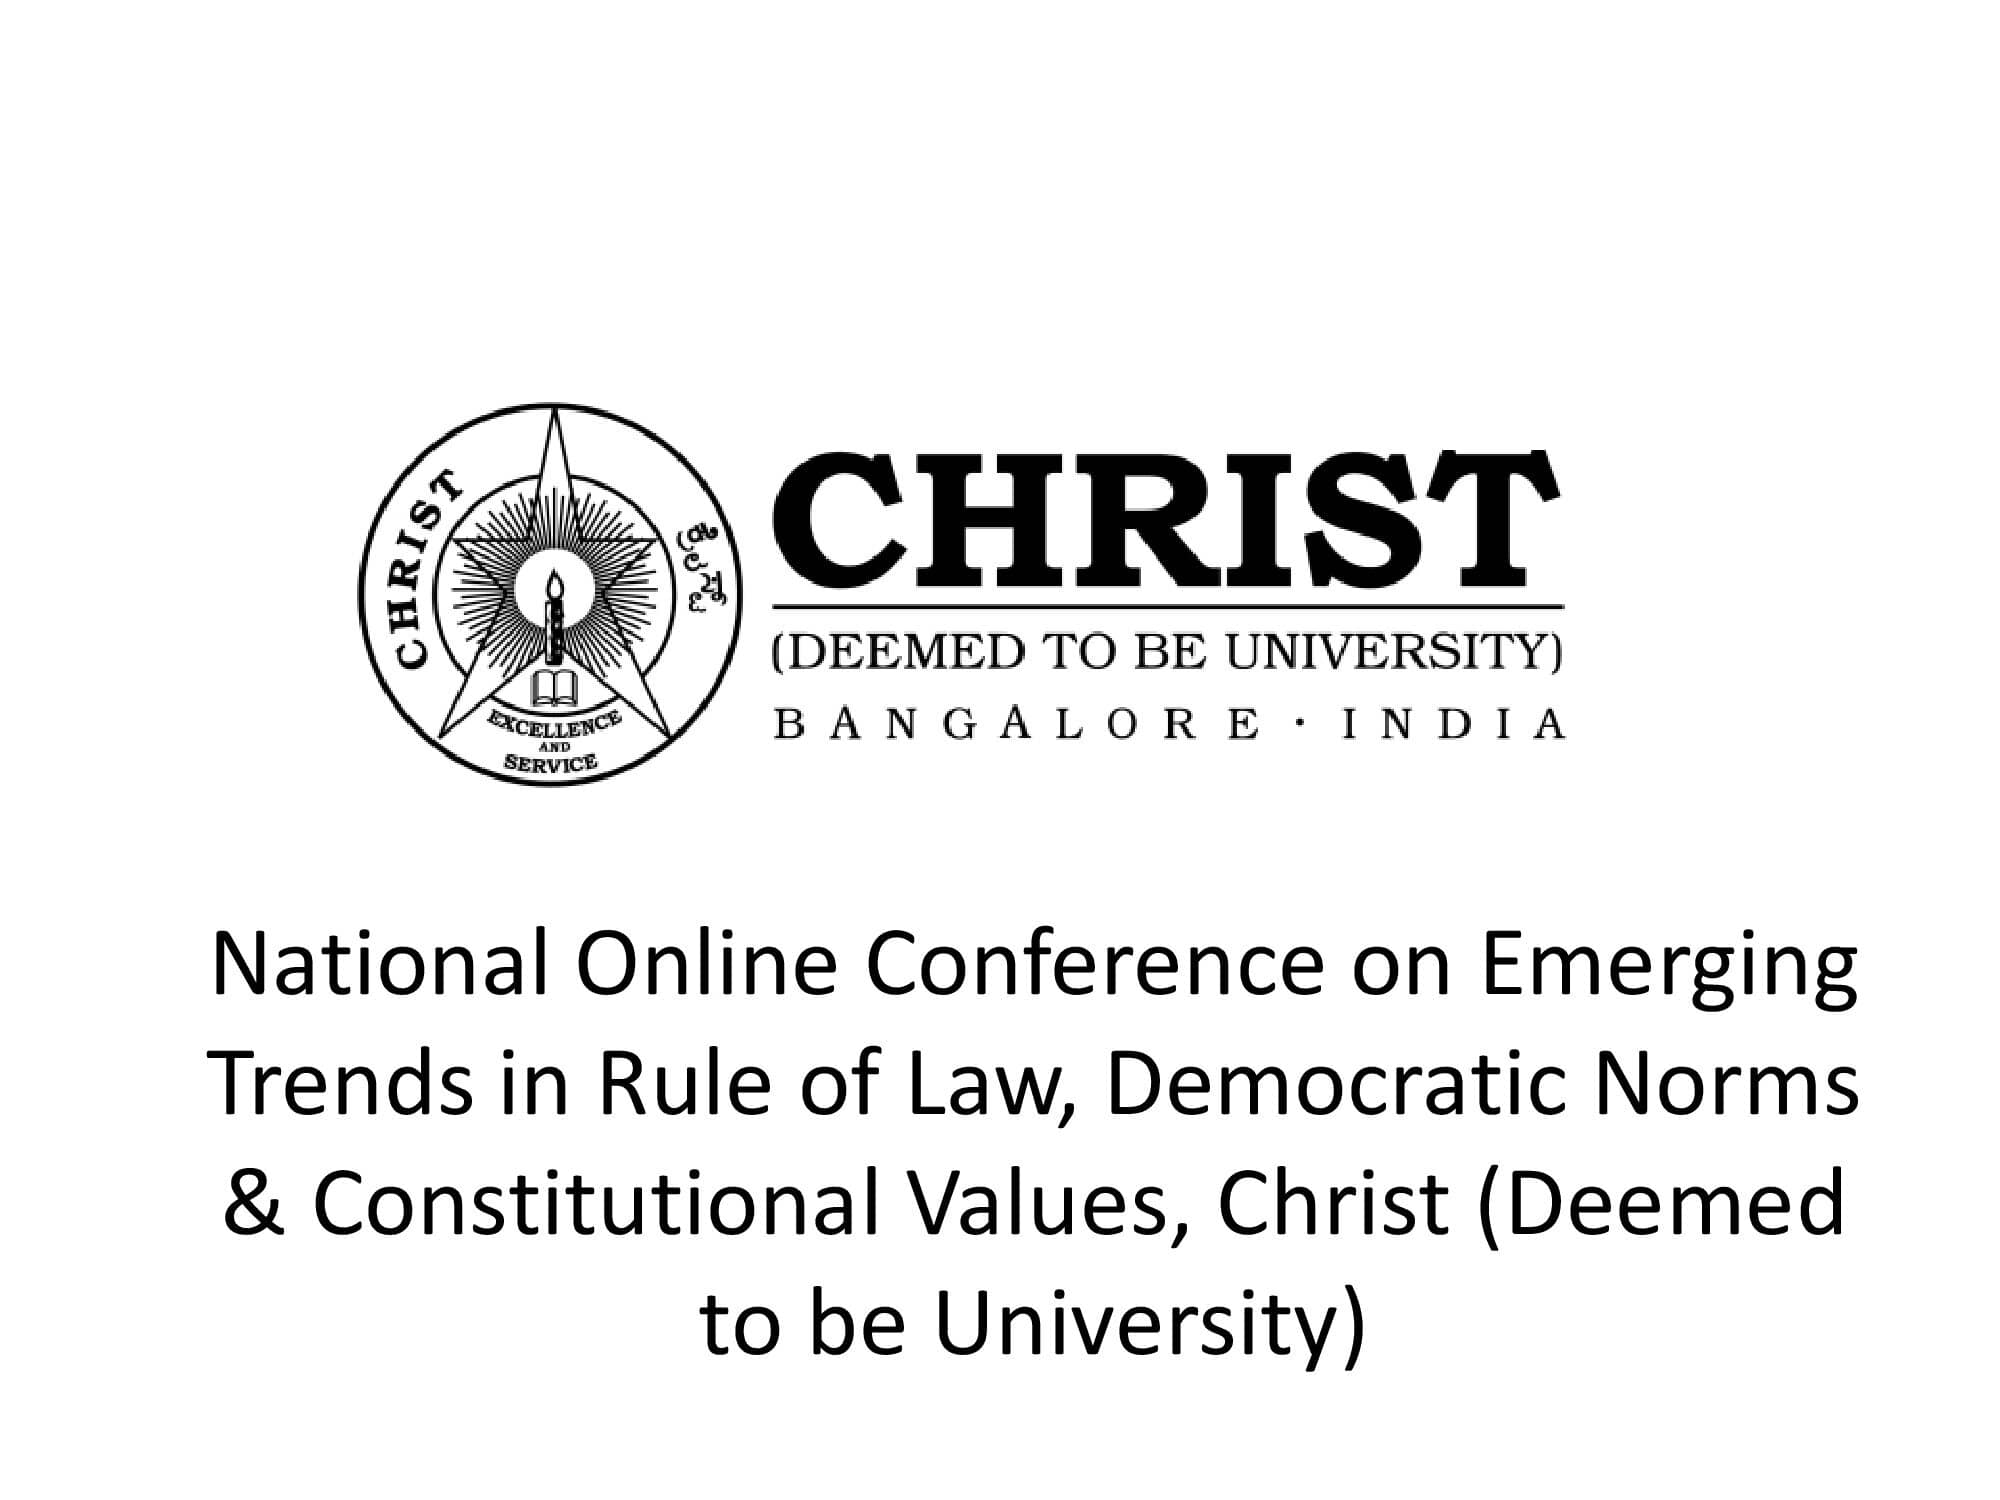 National Online Conference on Emerging Trends in Rule of Law, Democratic Norms & Constitutional Values, Christ (Deemed to be University)